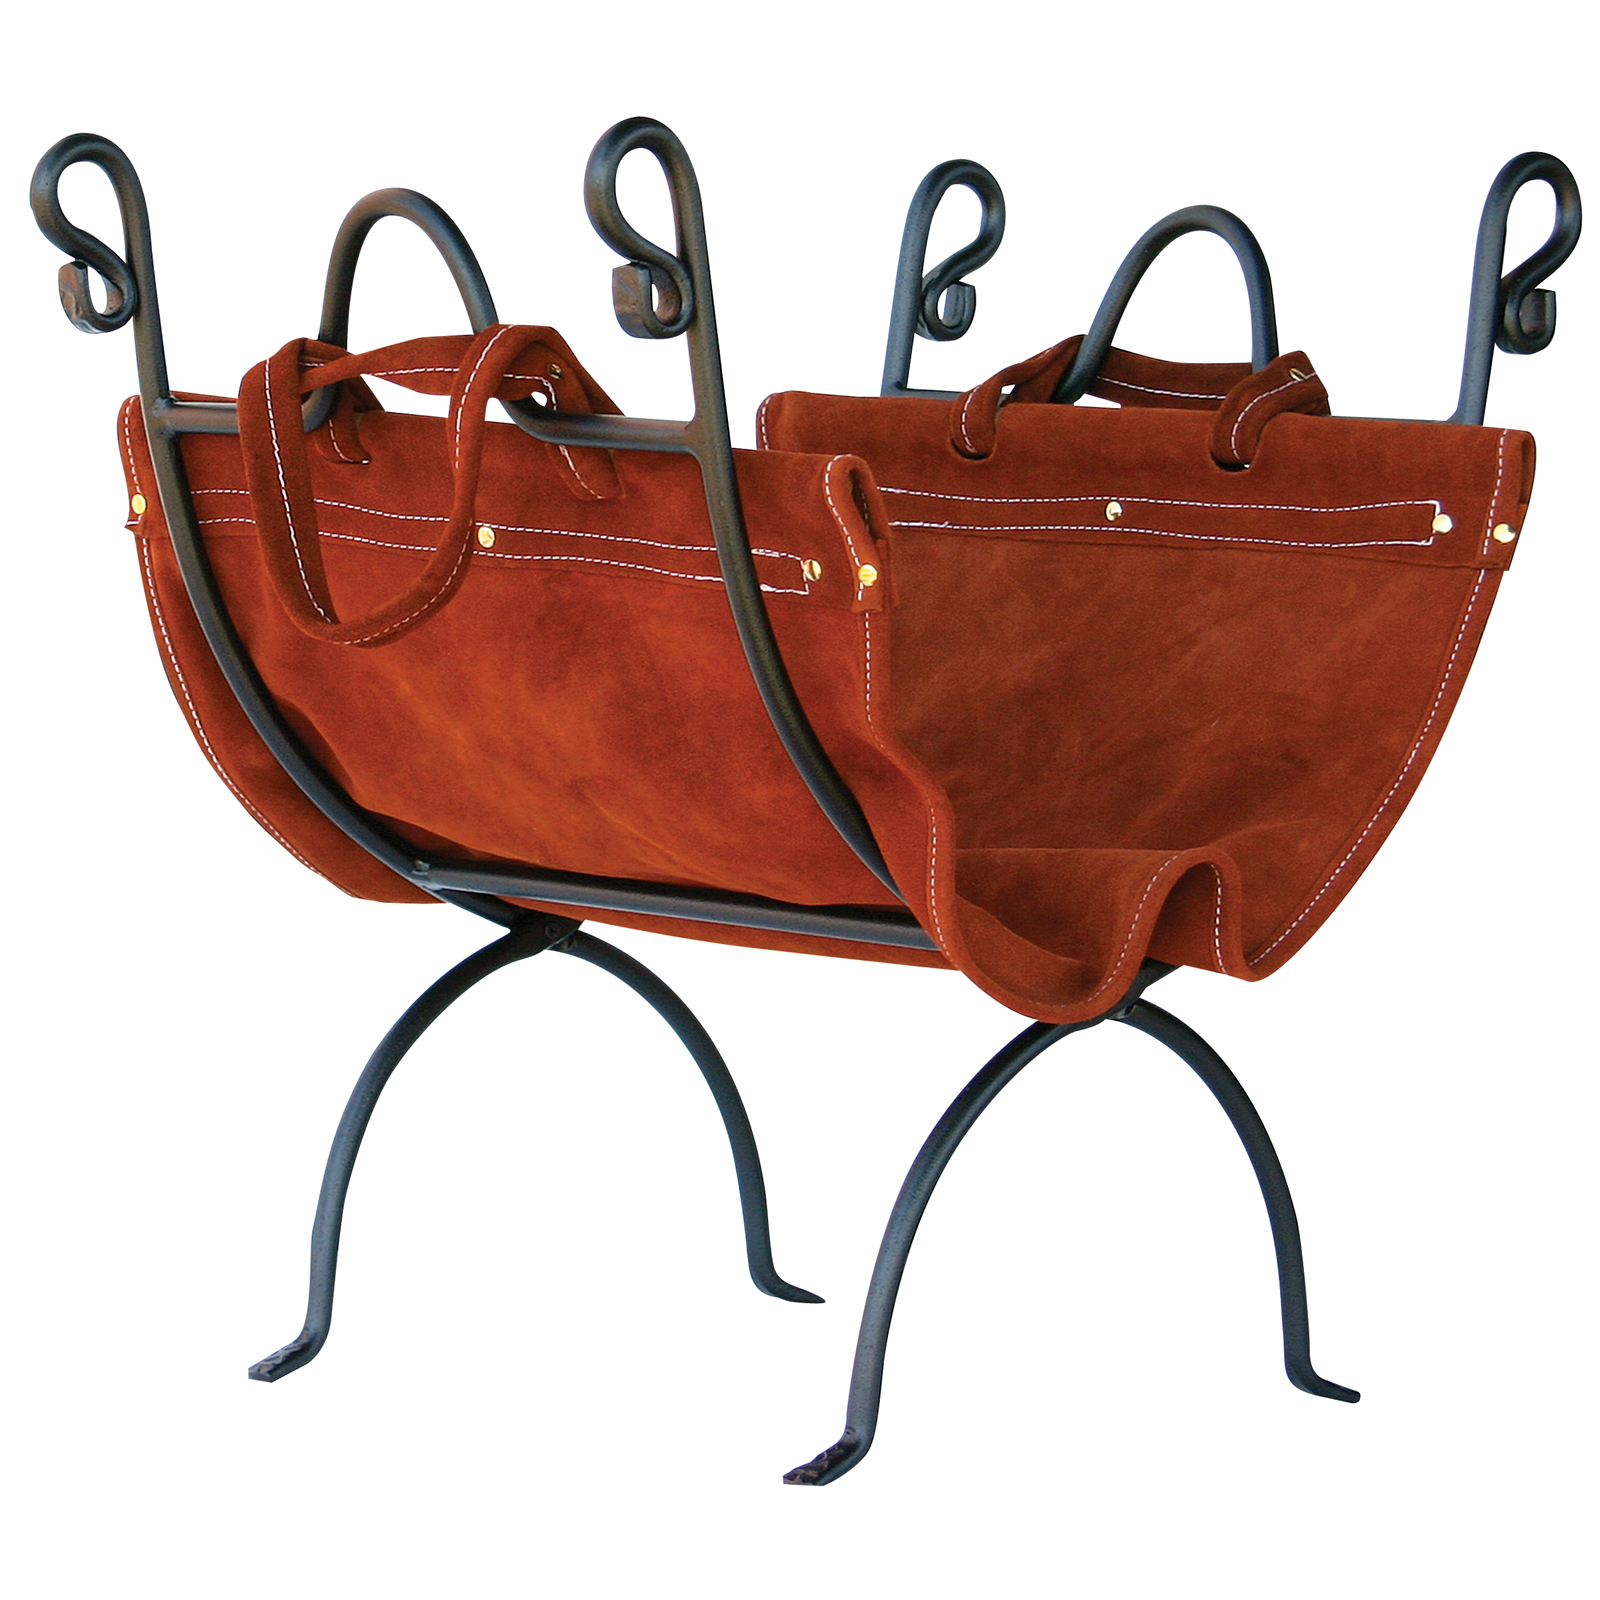 UniFlame Olde World Iron Log Holder with Suede Leather Carrier